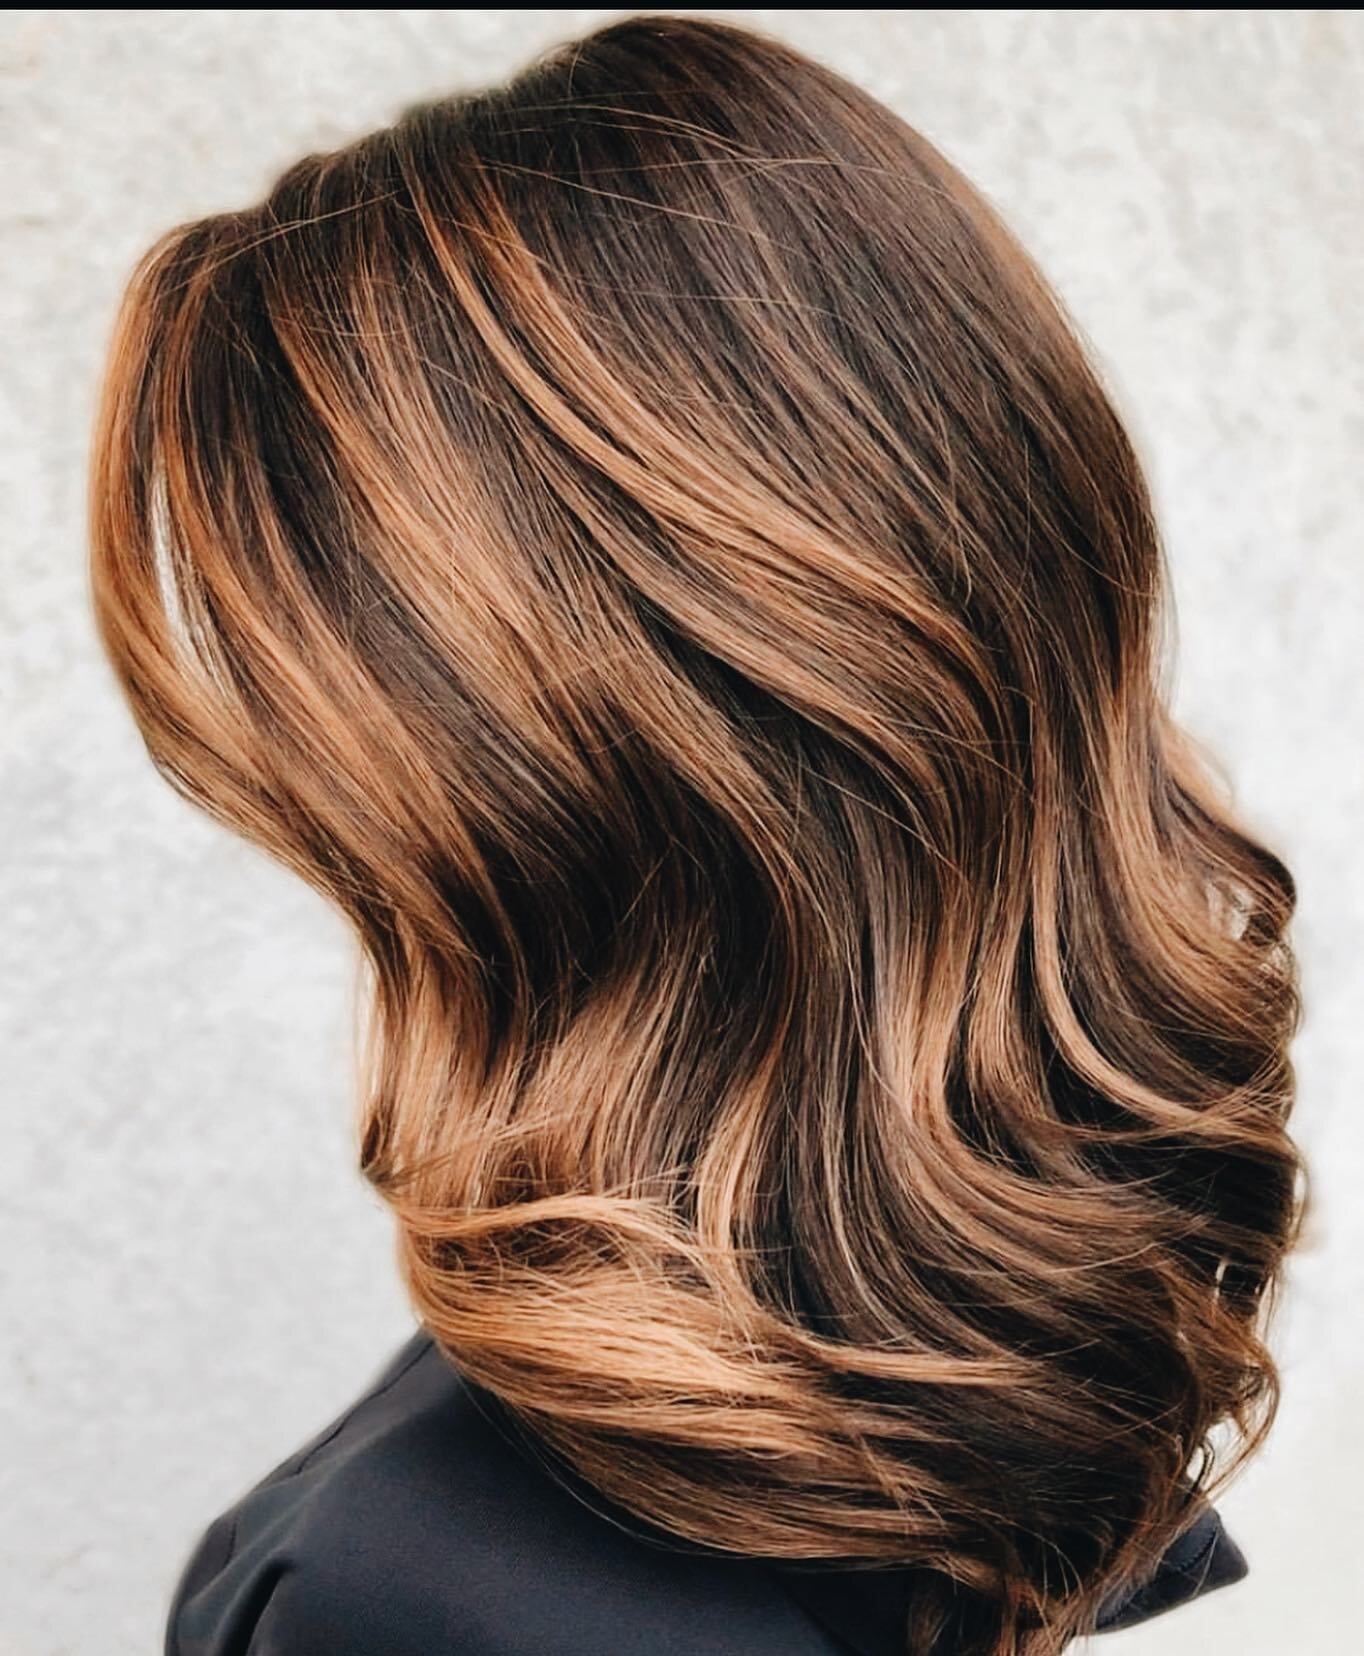 Fall color inspiration !!! As colorists we always hear brunettes &ldquo;hating red&rdquo; but if you incorporate red in the right way and have the right amount of depth next to it can be quite beautiful #carmelbalayage #balayage #fallhairtones #homes